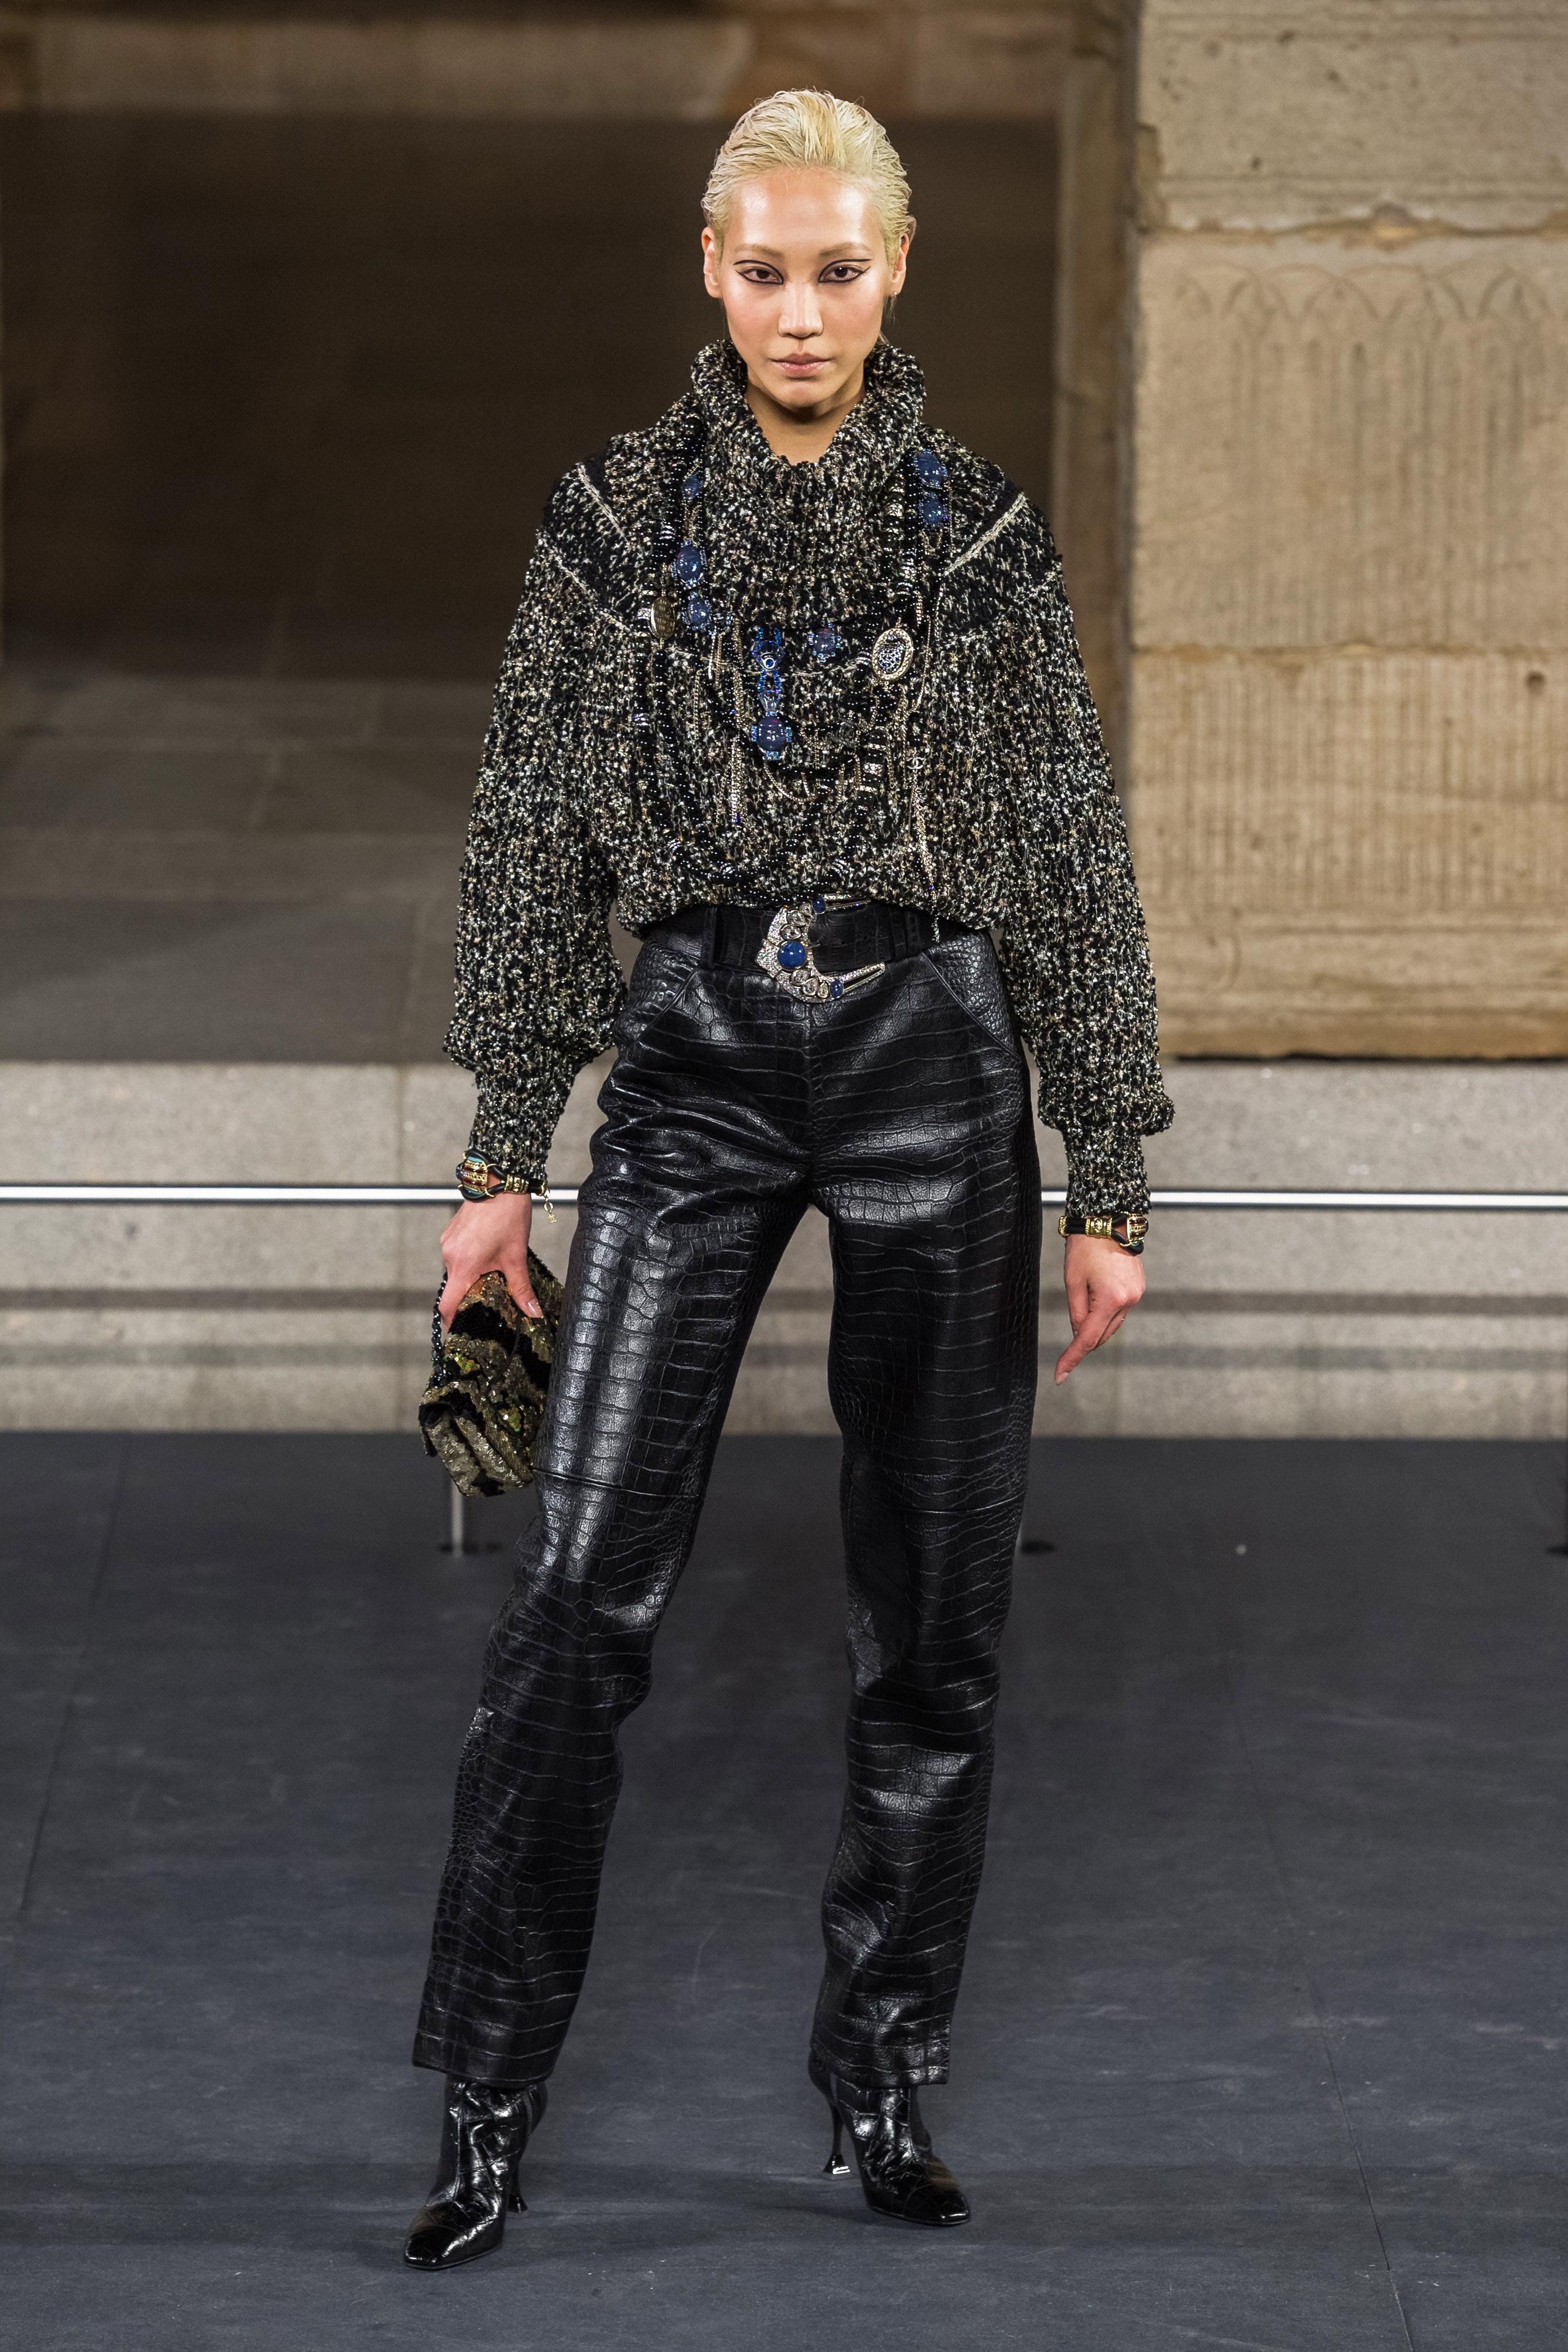 New Chanel woven tweed cardi jacket from 
Paris / New-York 2019 Pre-Fall Fashion Show which took place in Met Museum.
Size mark 36 fr. Never Worn.
- made of stunning woven fantasy tweed in black, beige with shimmering threads 
- CC logo with symbols